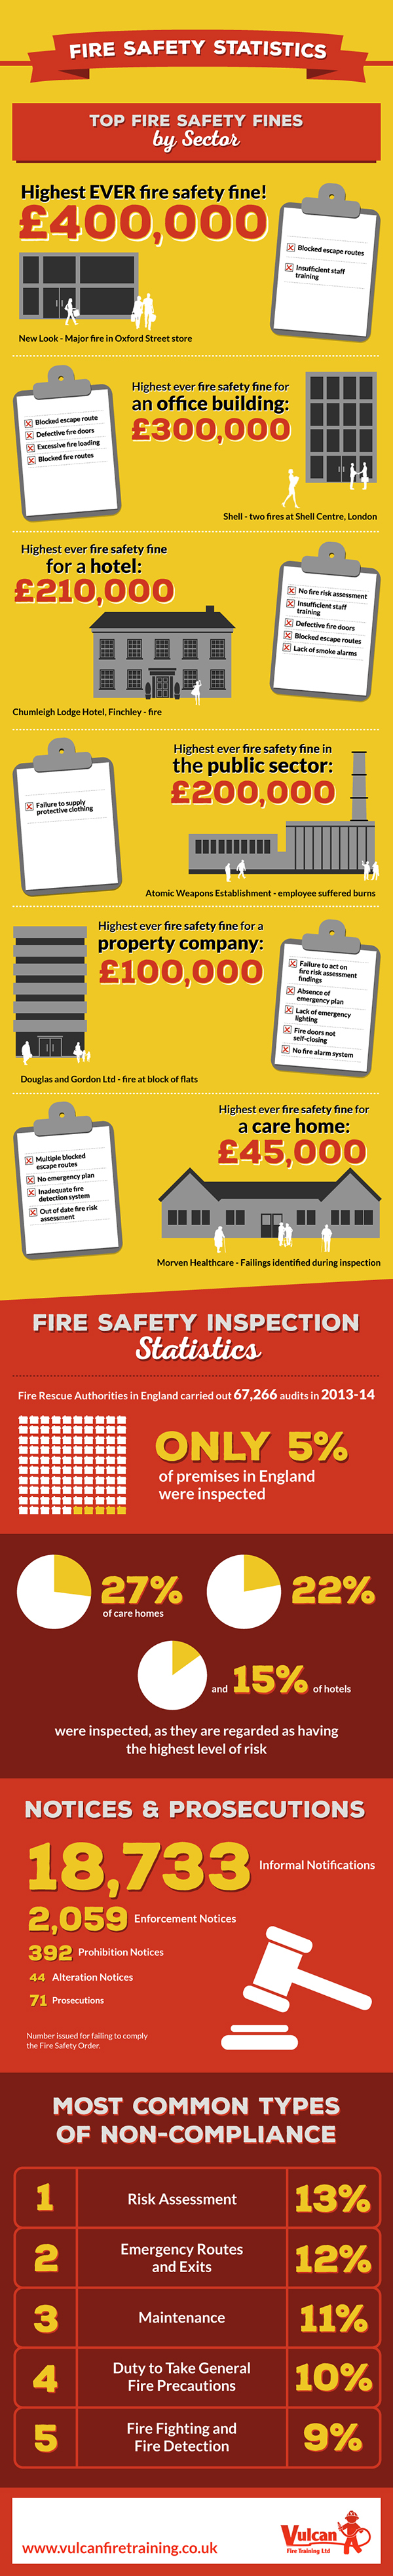 Fire Safety Statistics from Vulcan Fire Training